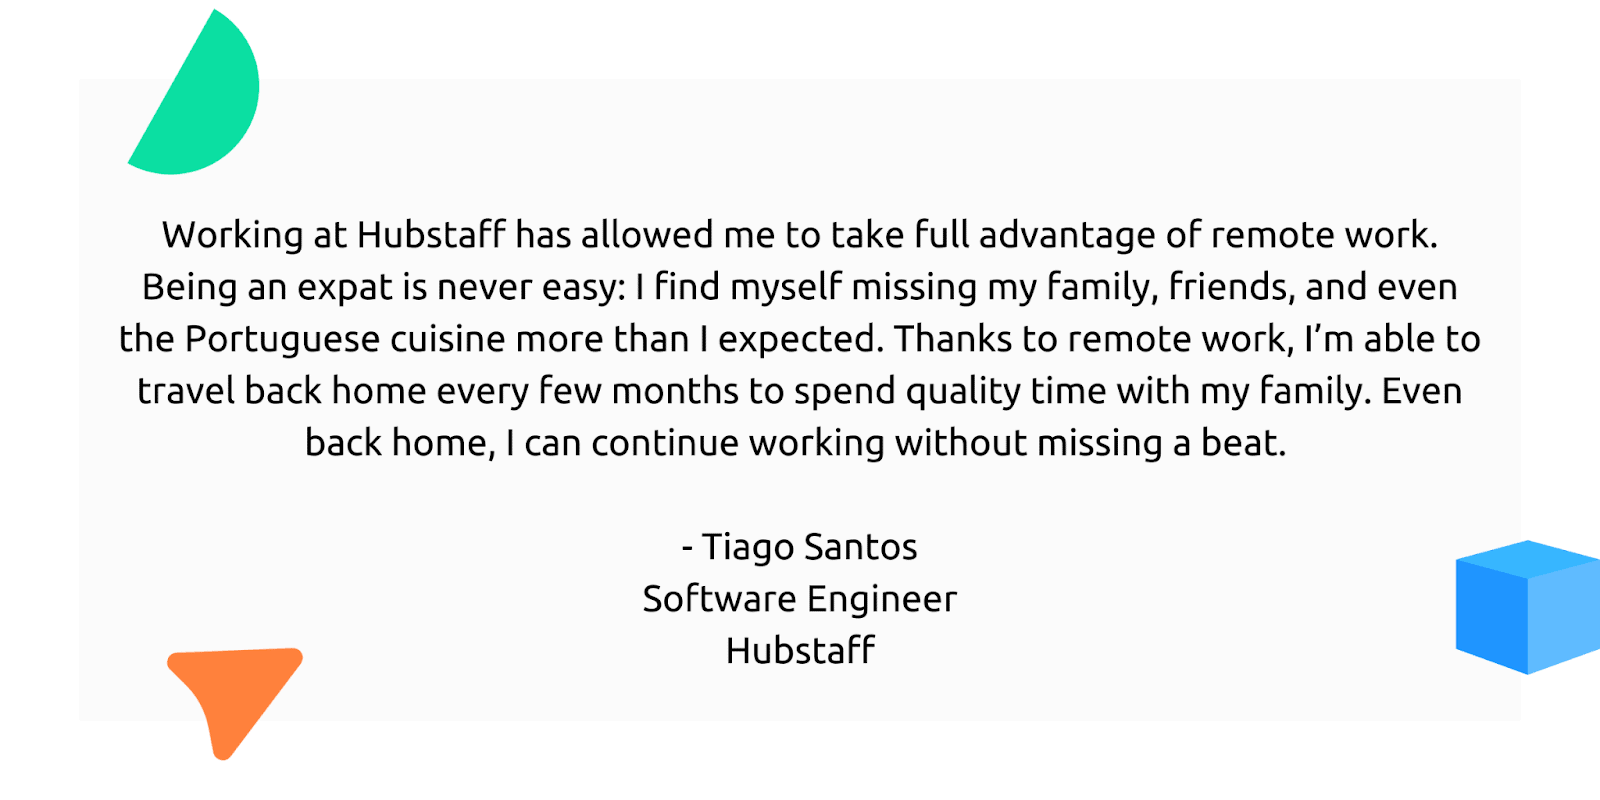 "Working at Hubstaff has allowed me to take full advantage of remote work. Being an expat is never easy: I find myself missing my family, friends, and even the Poruguese cuisine more than I expected. Thanks to remote work, I'm able to travel back home every few months to spend quality time with my family. Even back home, I can continue working without missing a beat."

- Tiago Santos, Software Engineer, Hubstaff